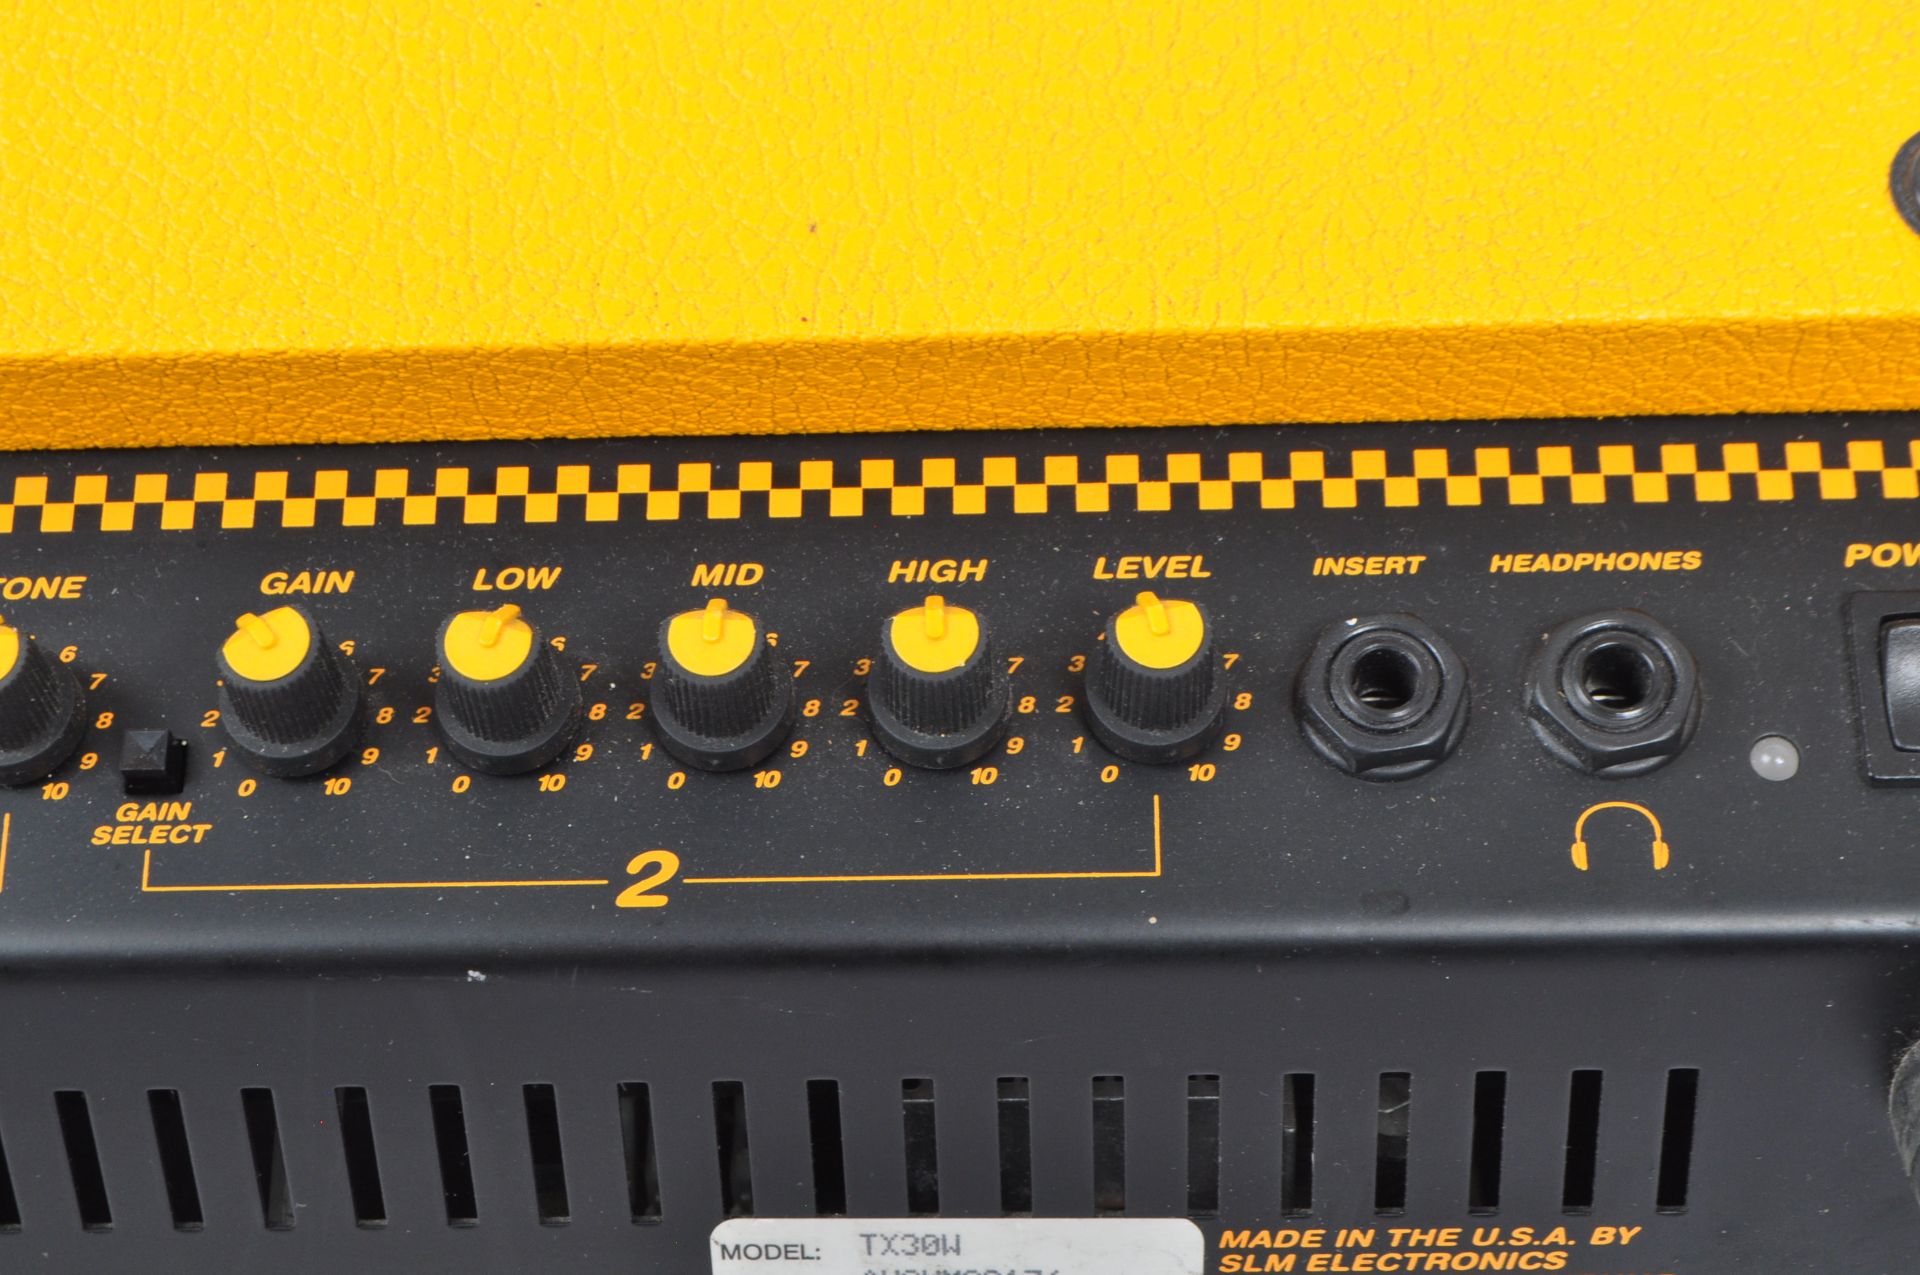 CONTEMPORARY AUDIO GUITAR TAXI TX30W AMPLIFIER BY CRATE - Image 5 of 7